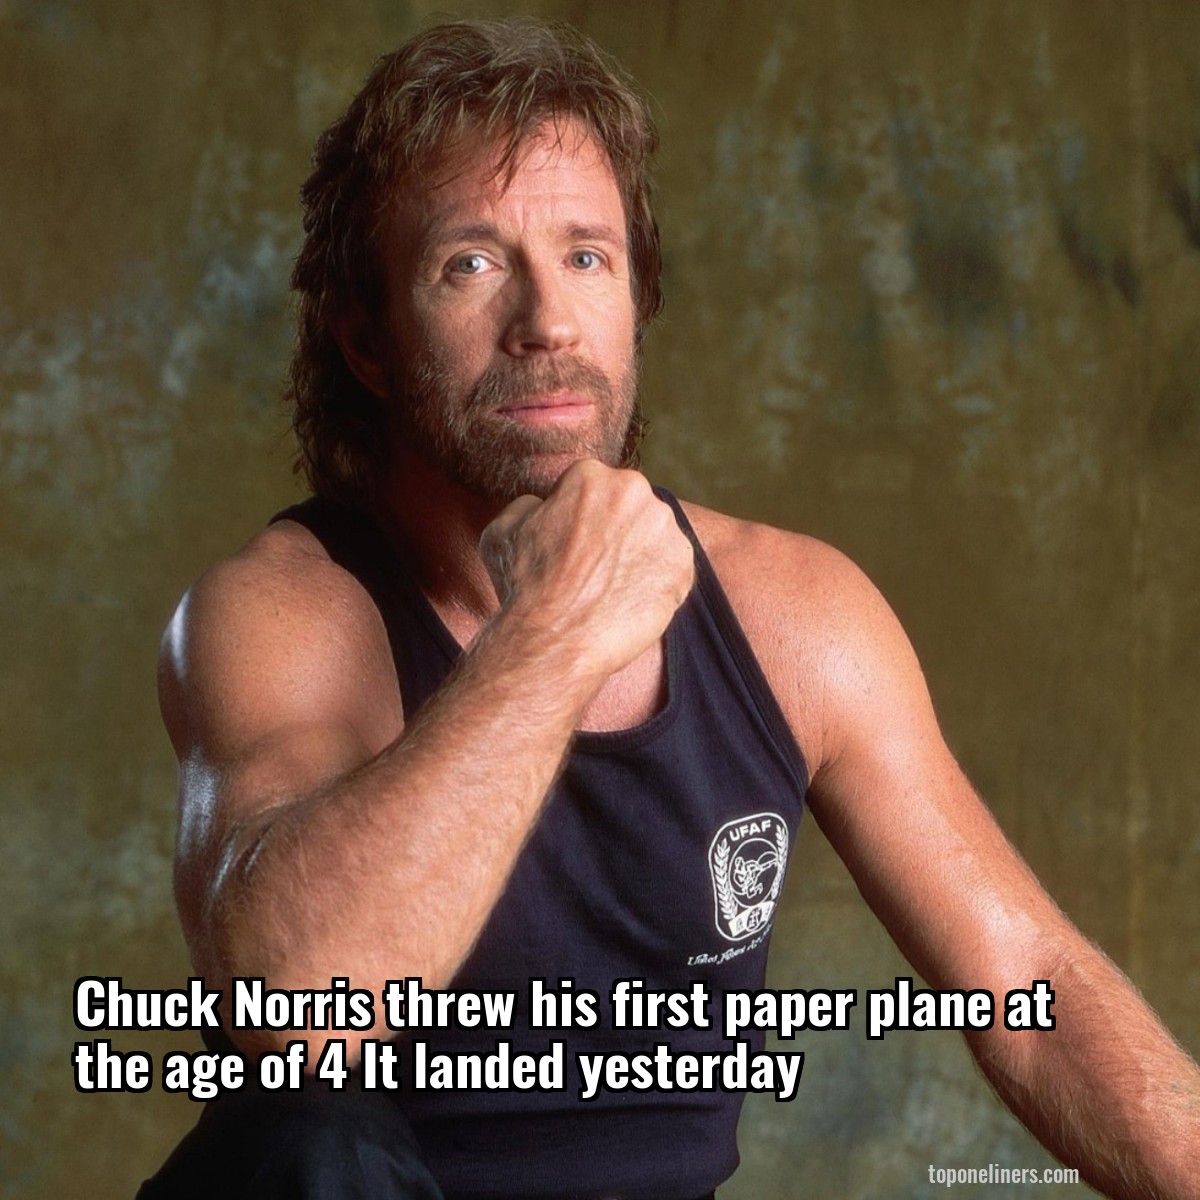 Chuck Norris threw his first paper plane at the age of 4 It landed yesterday